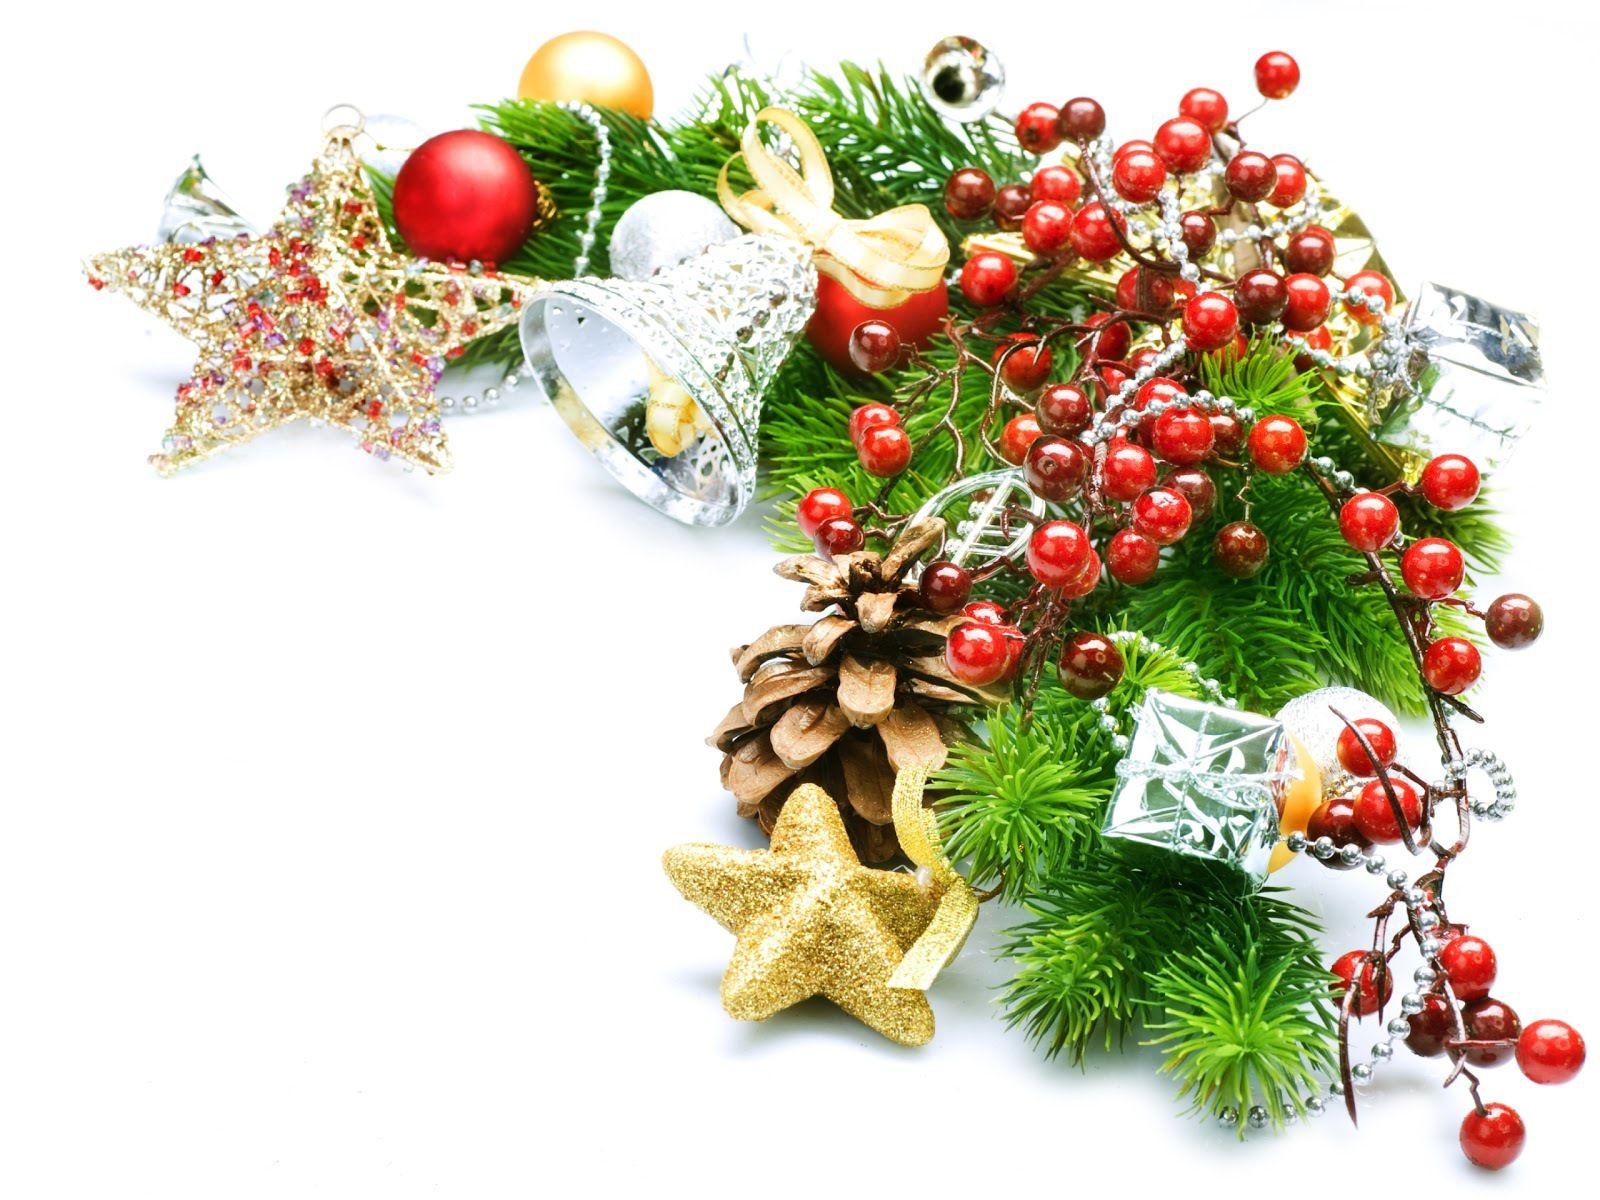 Decorated Christmas tree branch on Christmas wallpaper and image